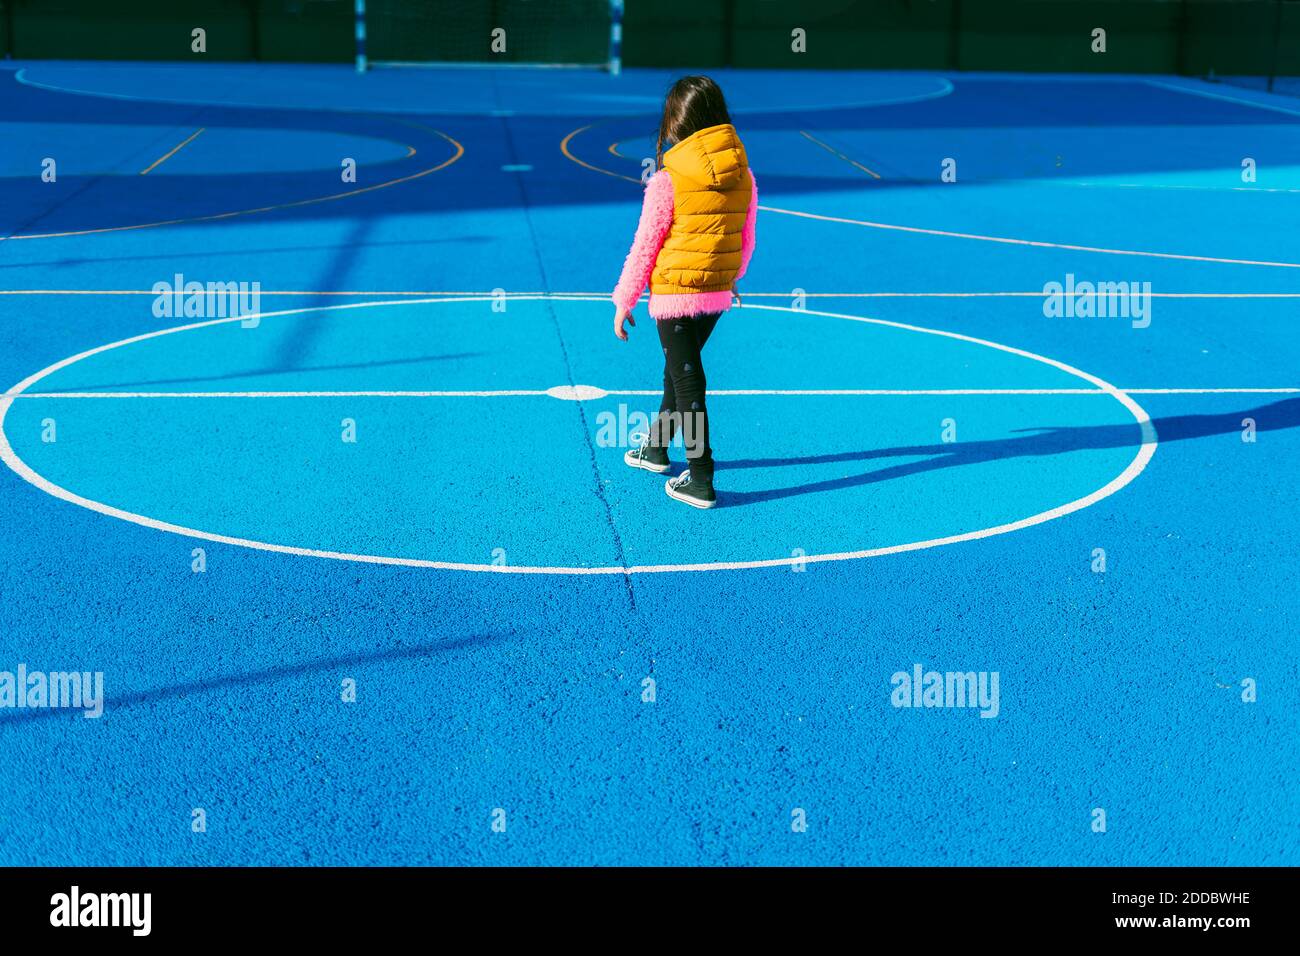 Girl in warm clothing standing on soccer court during sunny day Stock Photo